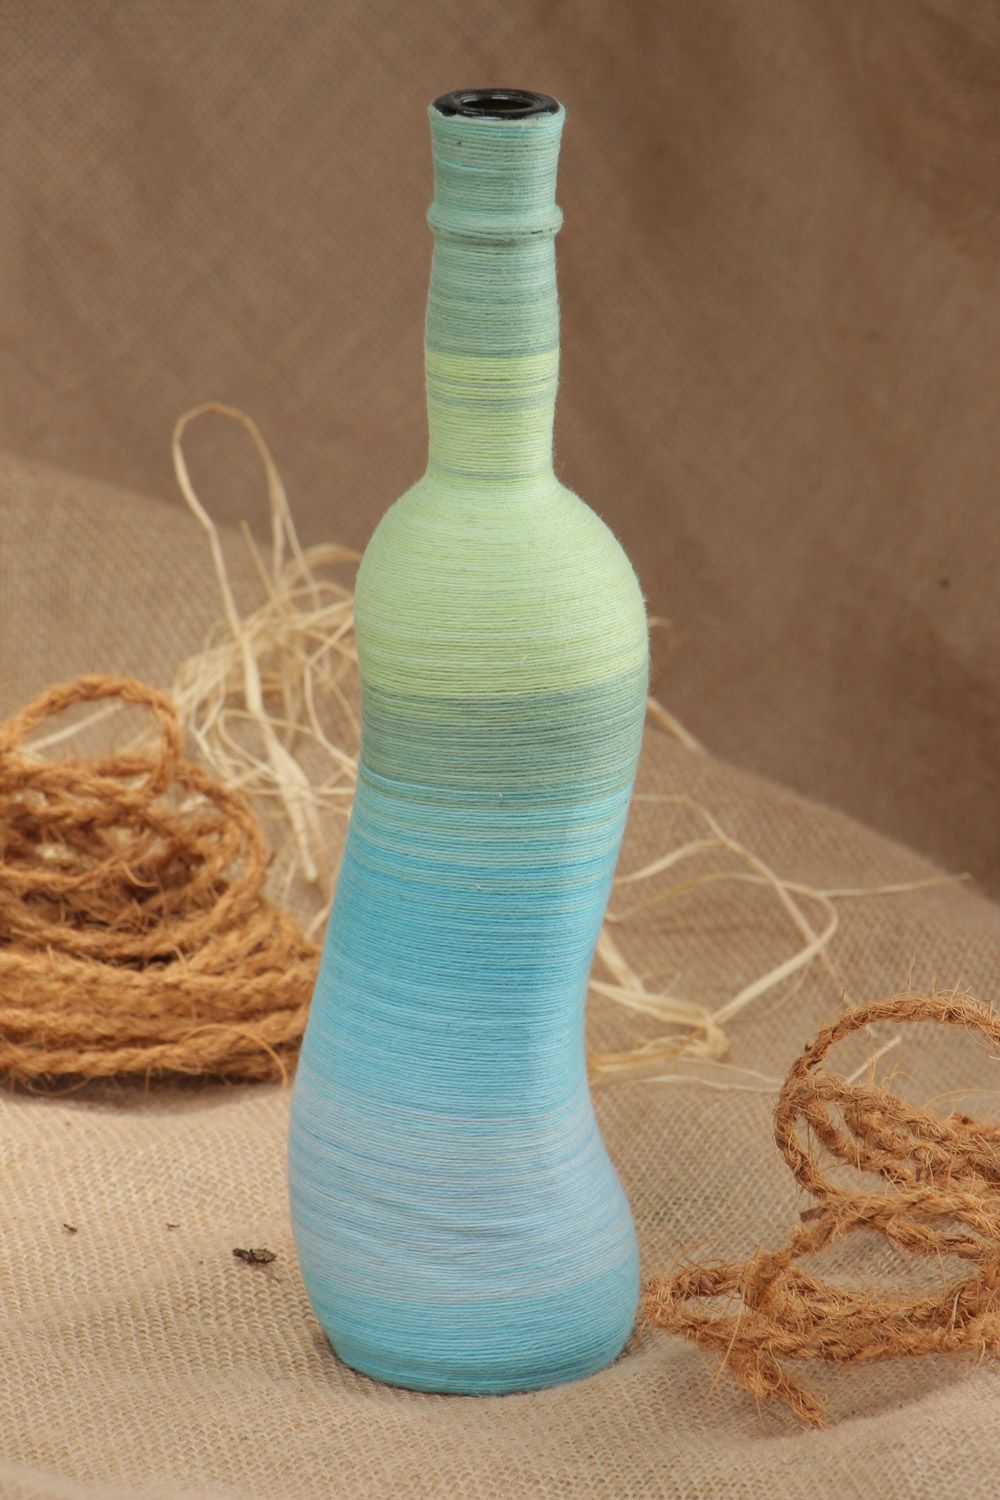 Handmade decorative glass bottle woven over with cotton threads 700 ml photo 1